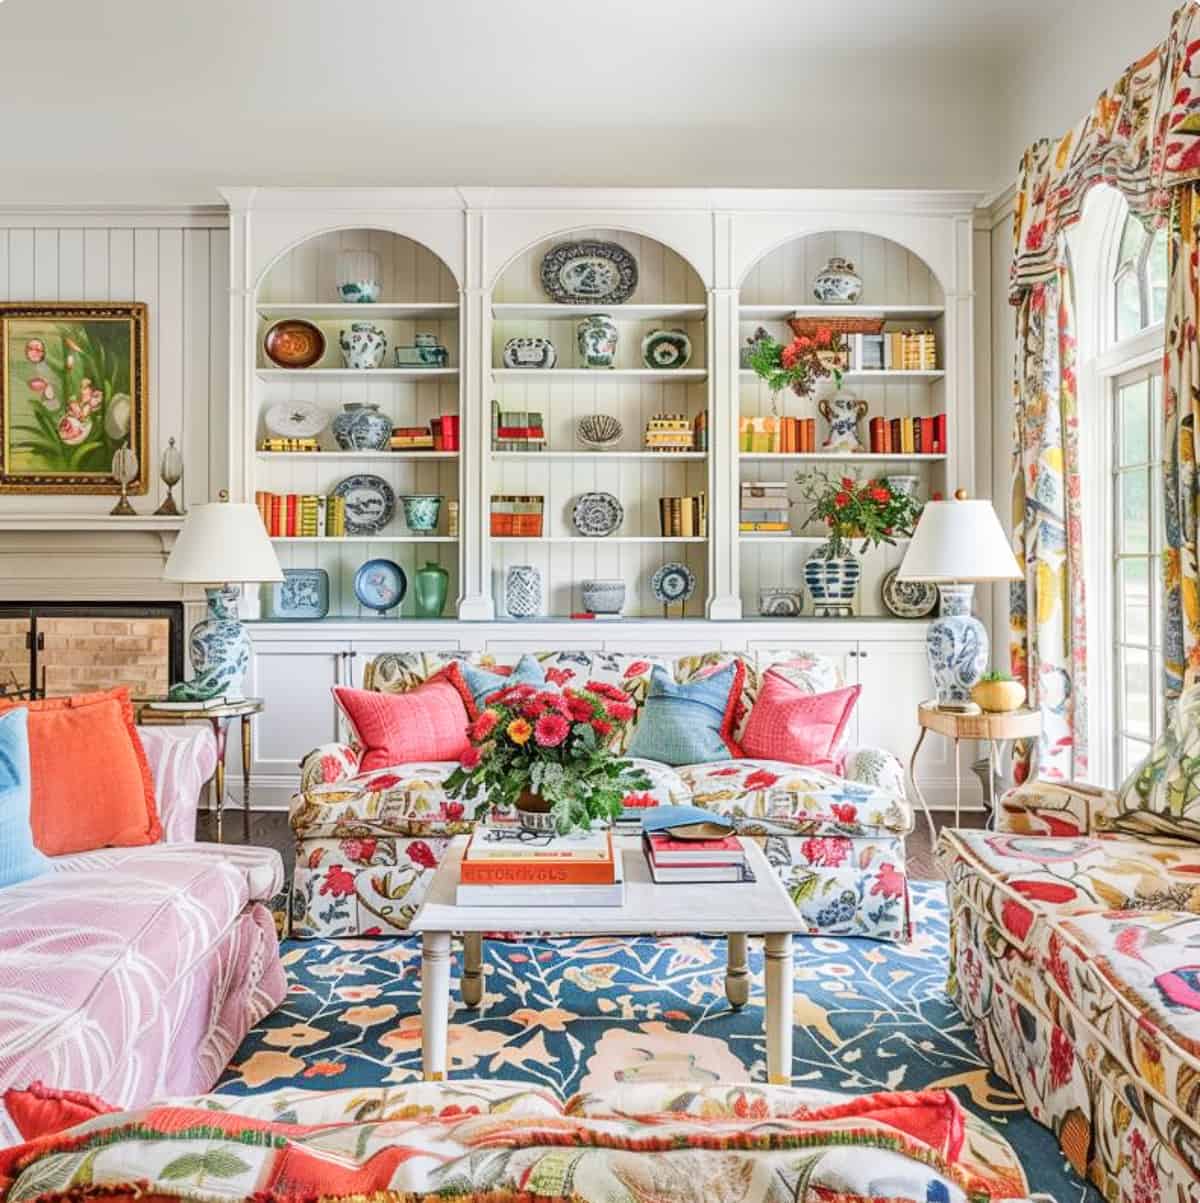 floral upholstered couch and a pair of lamps in front of built-in white shelves in a living room decorated with colorful, traditional living room type accessories